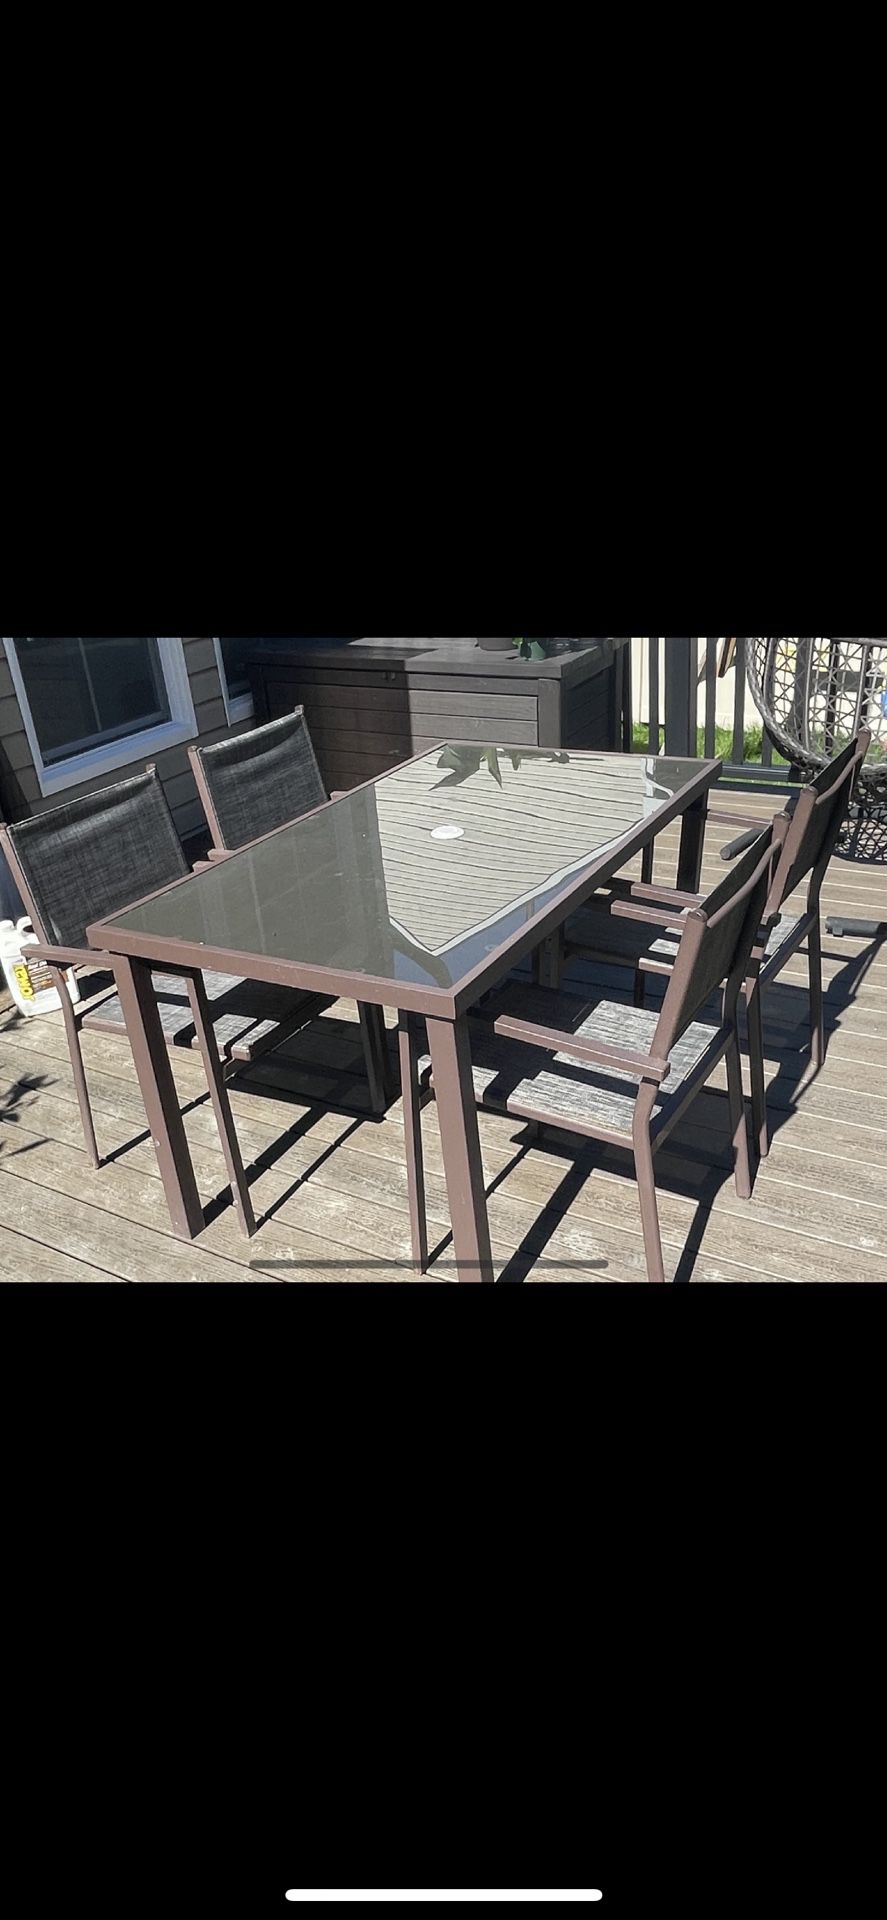 patio furniture outdoor table 4 chairs set